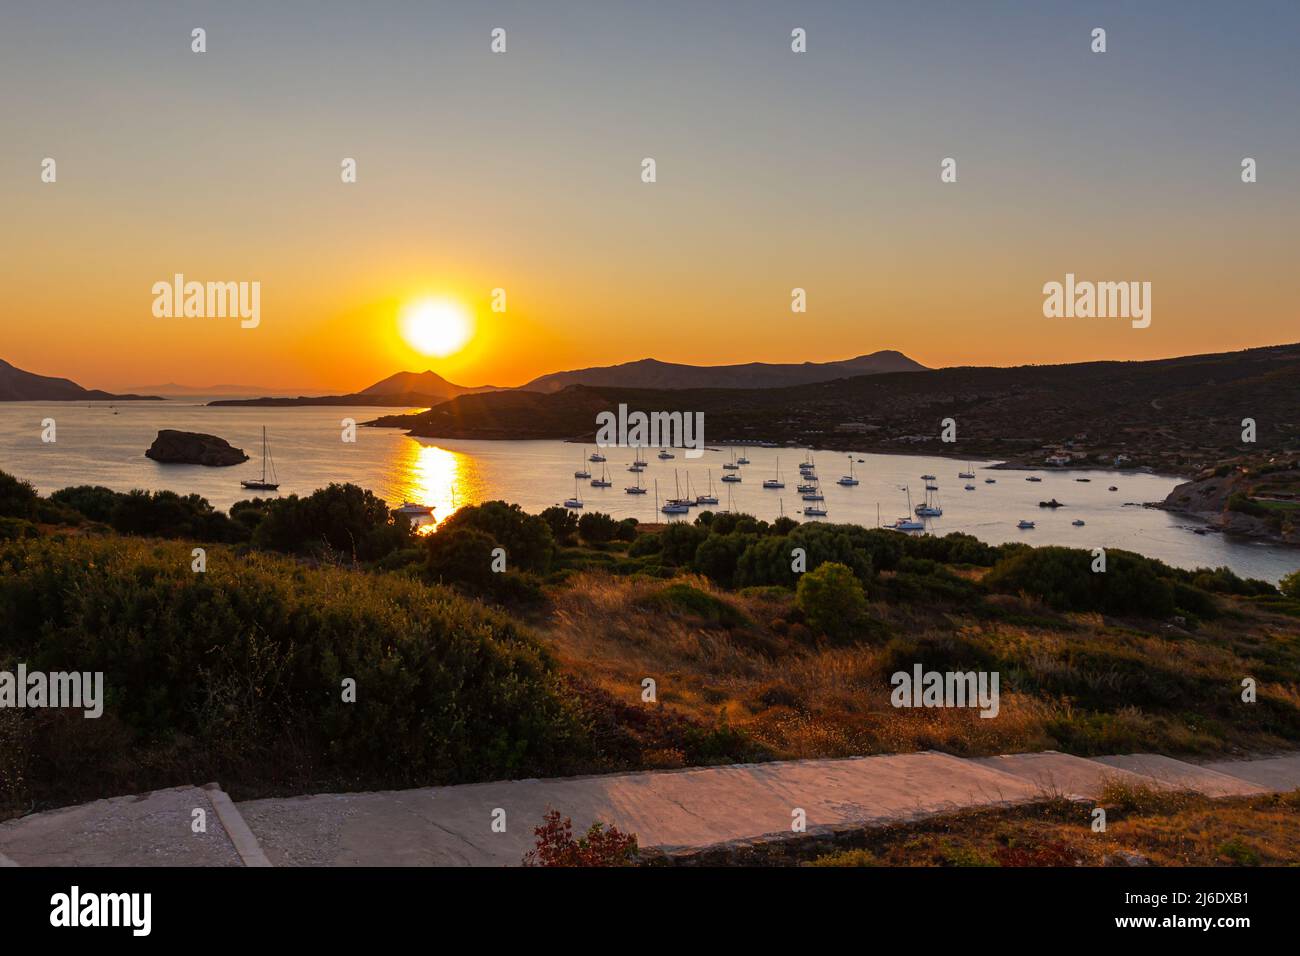 Sunset in  Lavrio Bay. The red and yellow glowing sun sinks on the horizon. Boats anchor and lie off the coast. Romantic scene in the Cyladen archipel Stock Photo